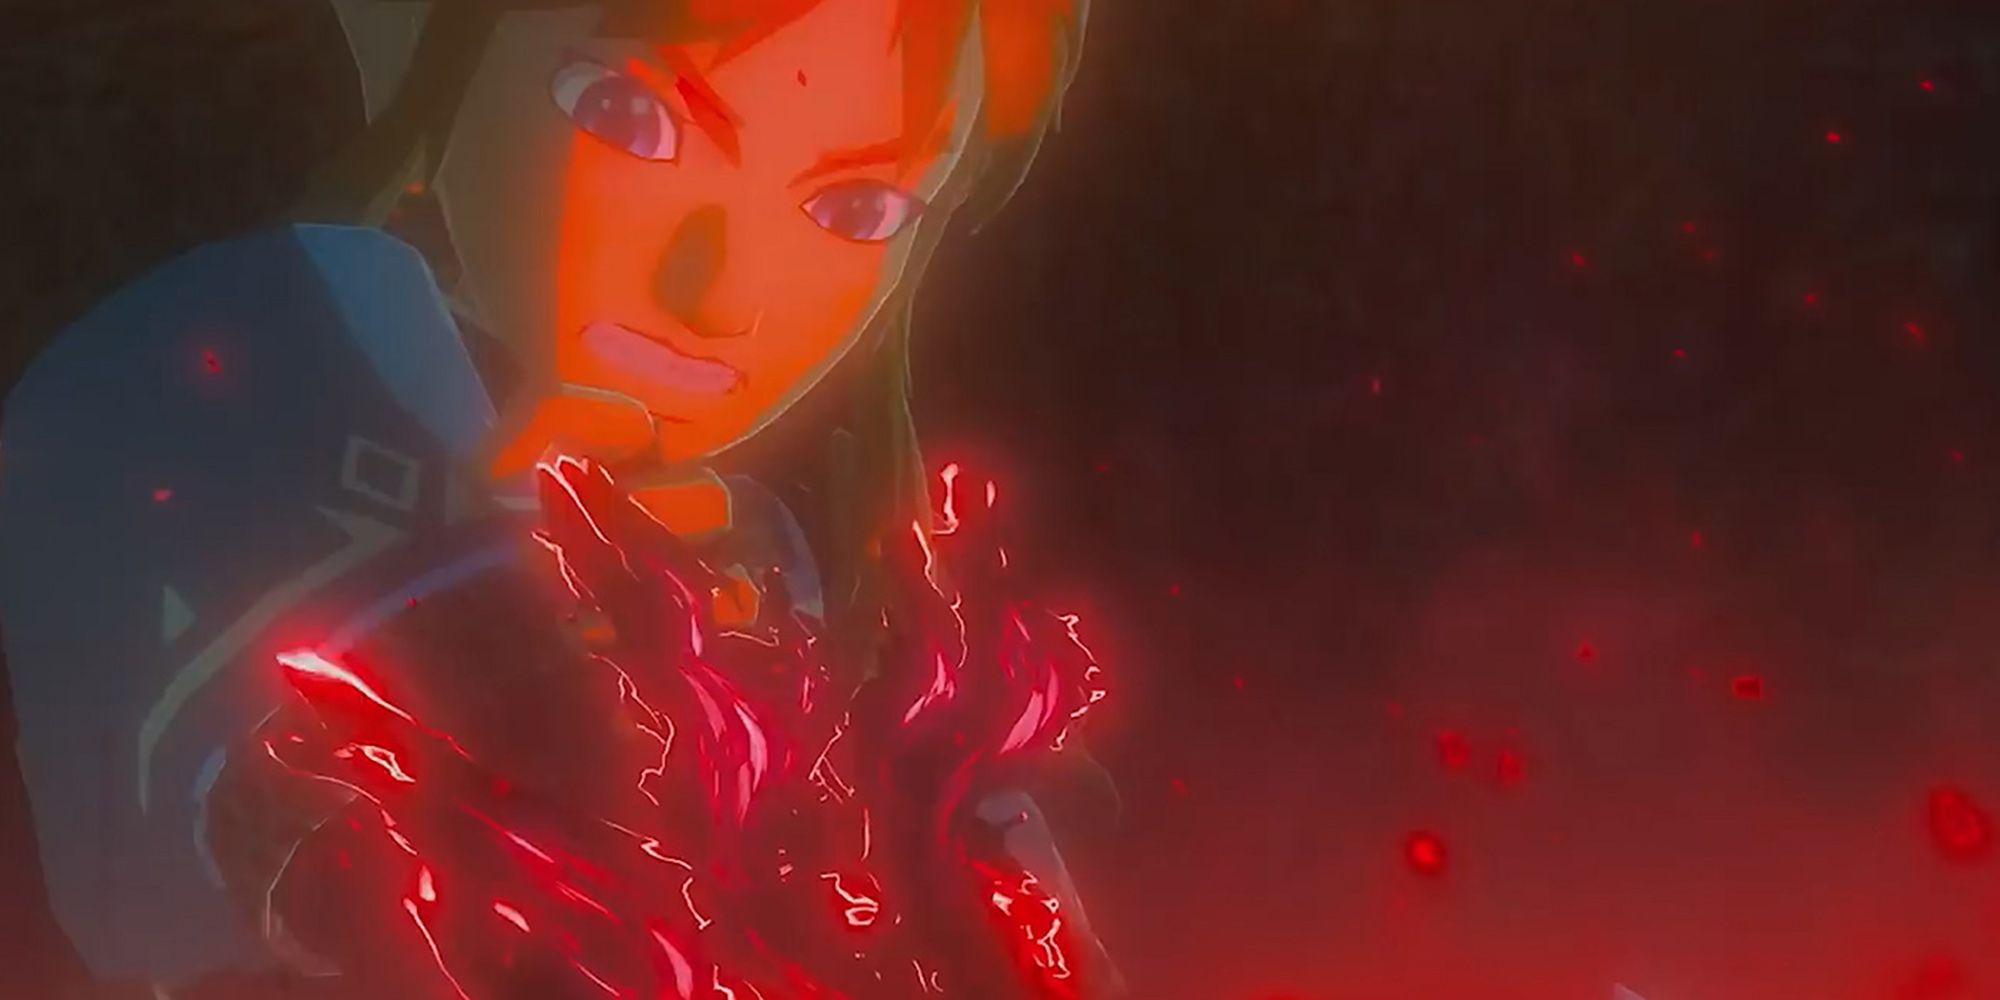 Legend Of Zelda Breath Of The Wild 2 Second Trailer The Start Of The Trailer Where Links Arm Seems To Be Getting Infected With Malice 1